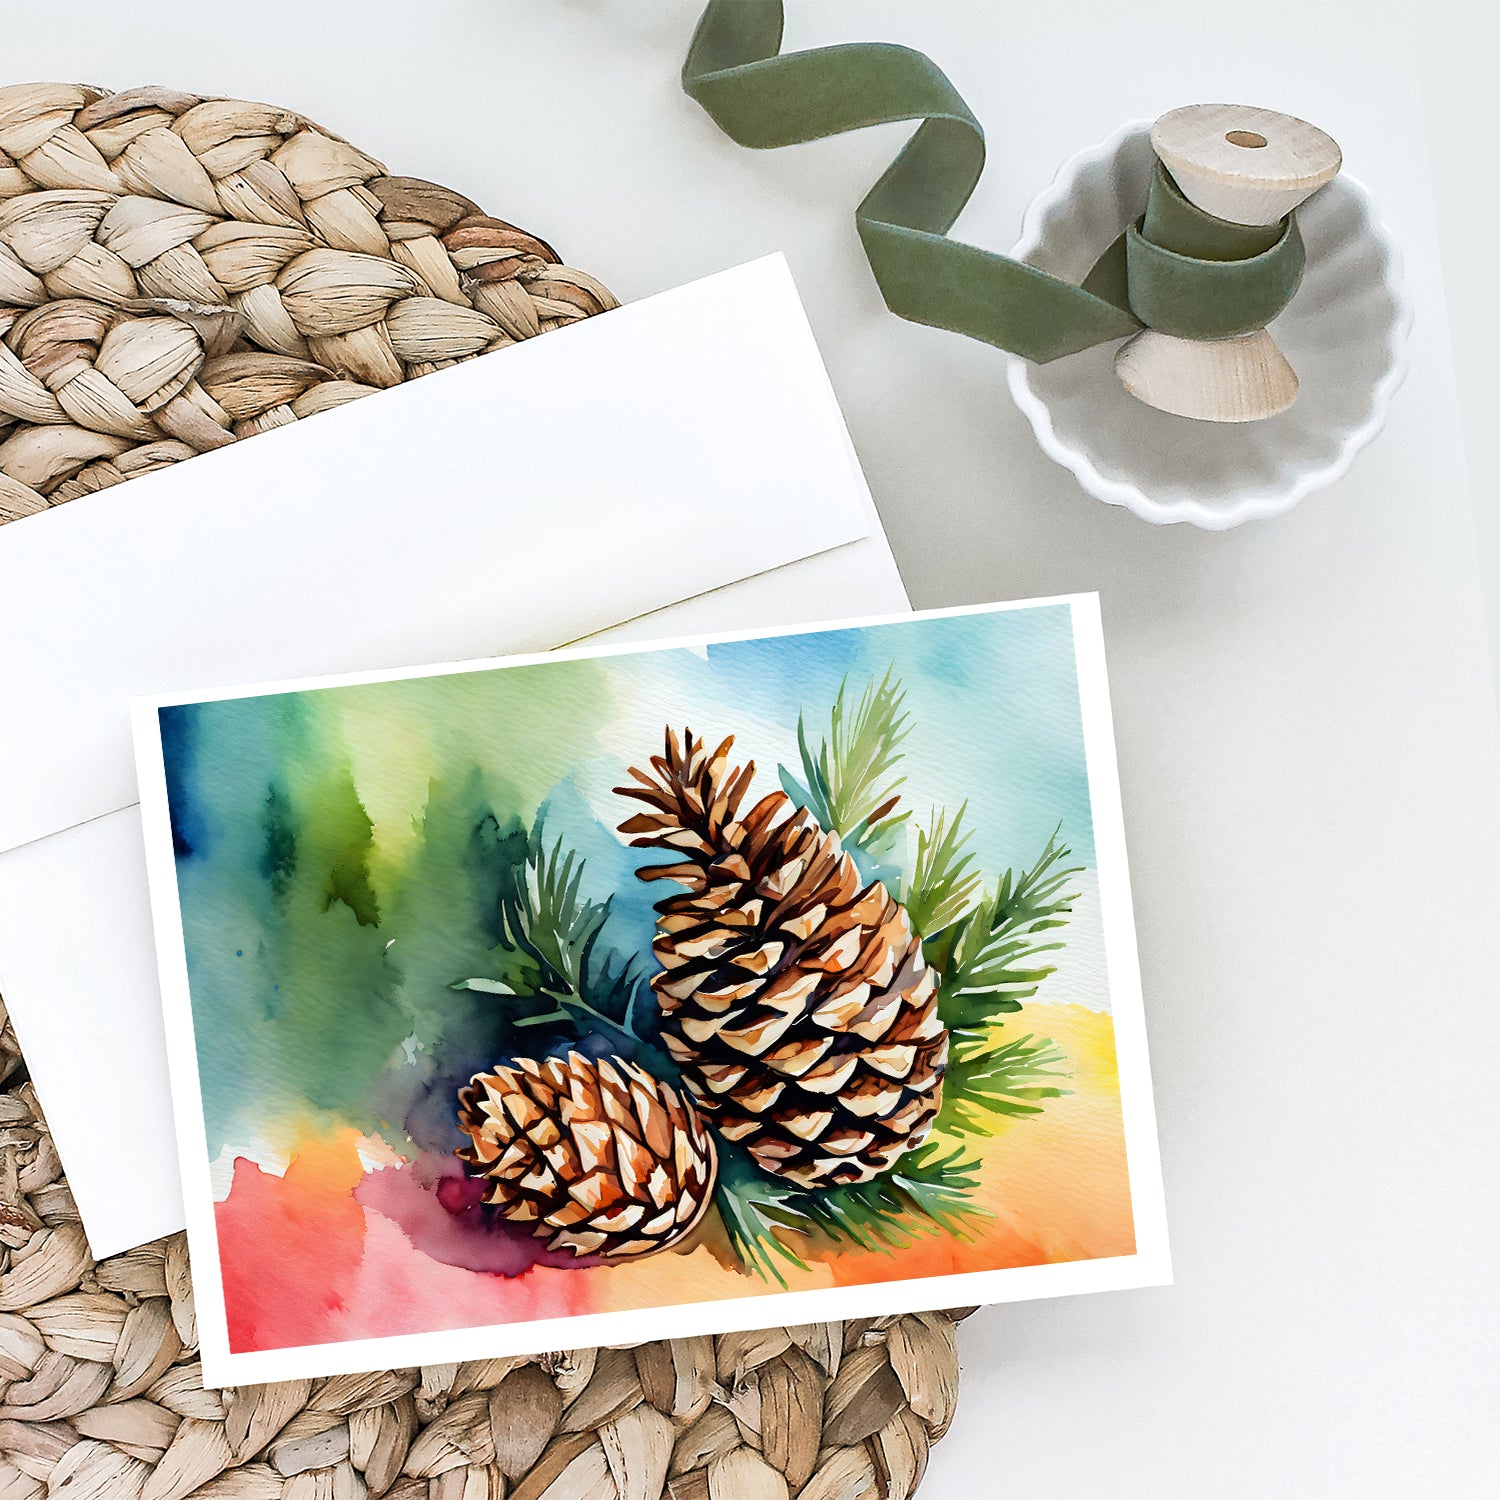 Maine White Pine Cone and Tassels in Watercolor Greeting Cards and Envelopes Pack of 8